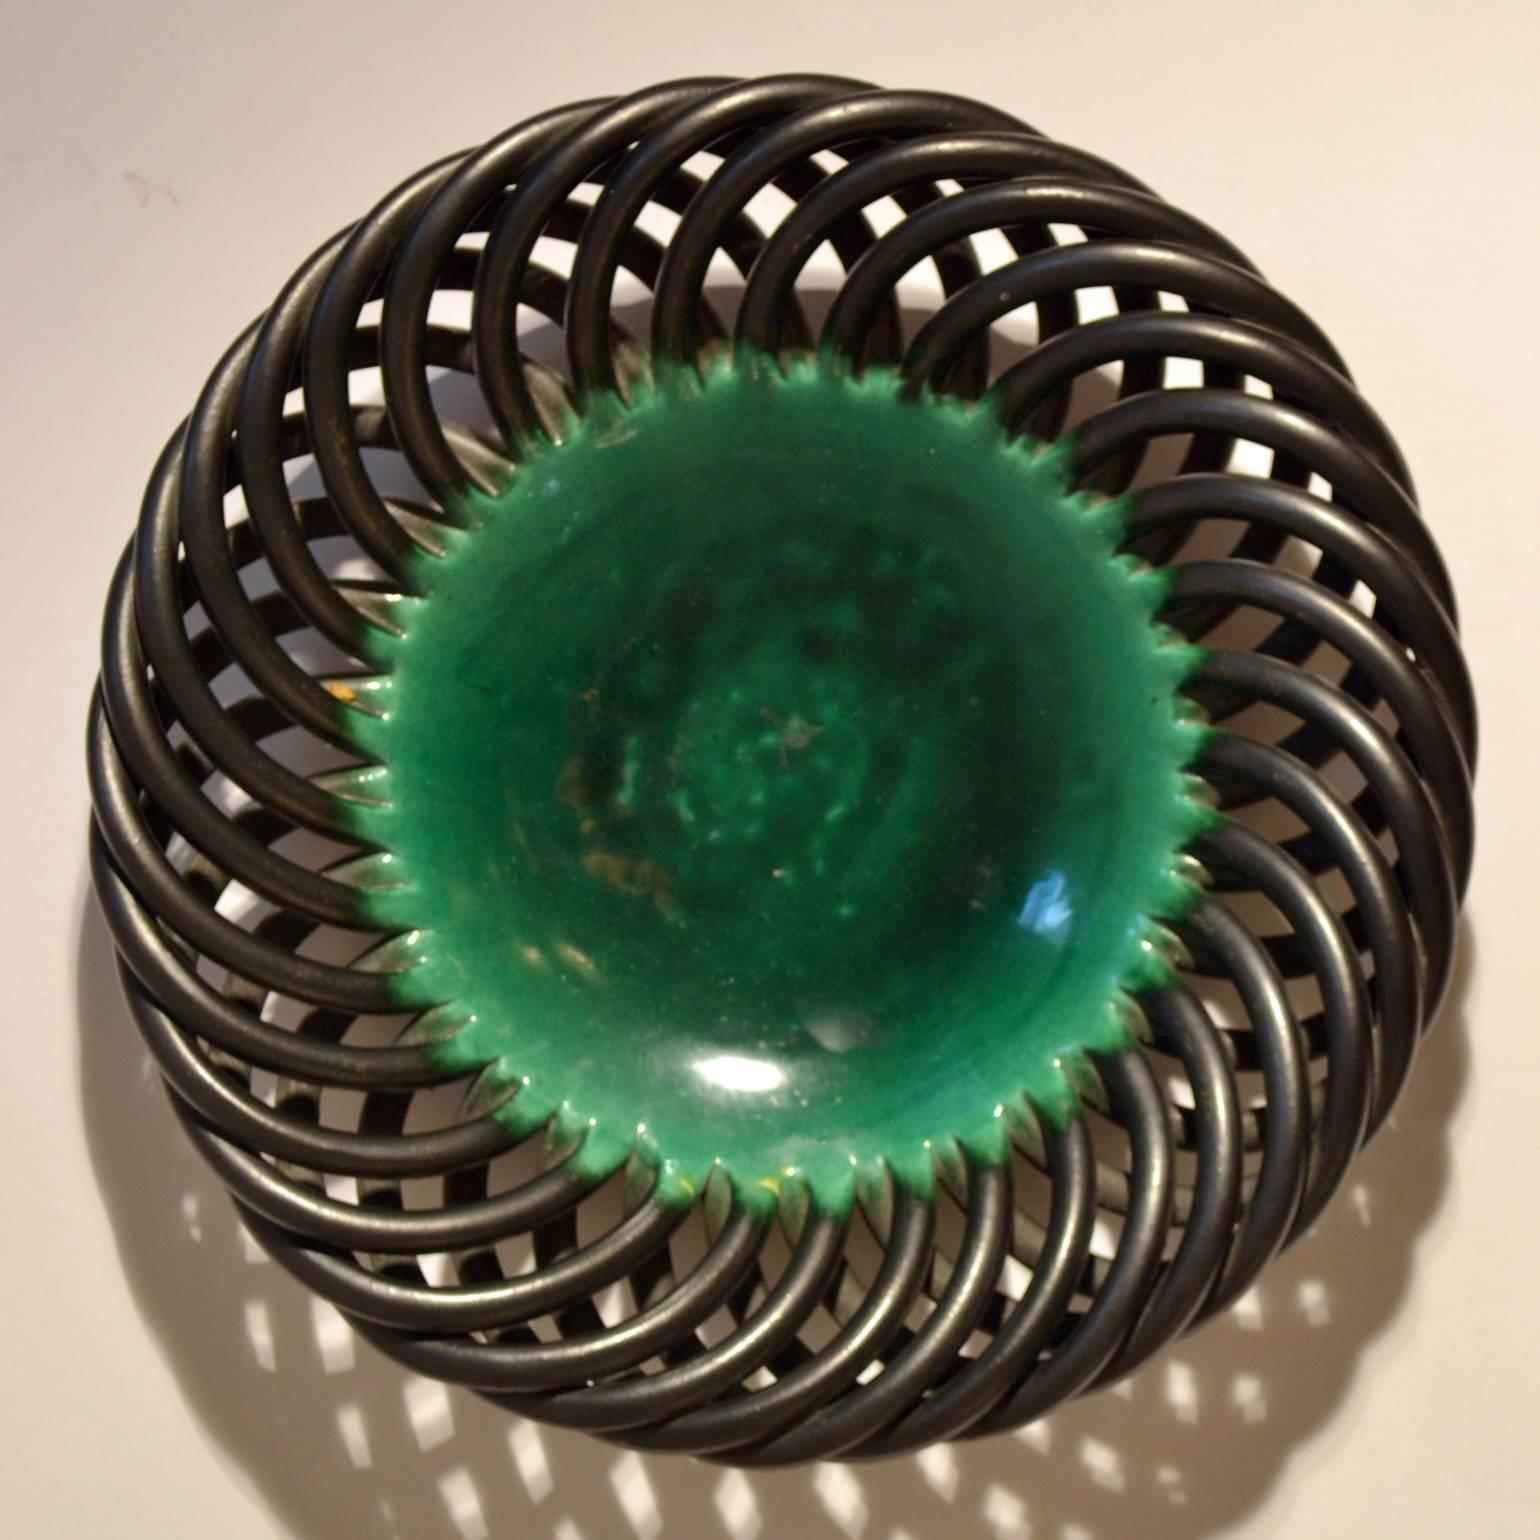 Sculptural formed ceramic, French, 1950s fruit bowl in the style of Jerome Massier, Vallauris with an embossed signature.
The dish has a central shiny emerald green glaze, edged with twisted strings in a graphite color satin glaze.
  